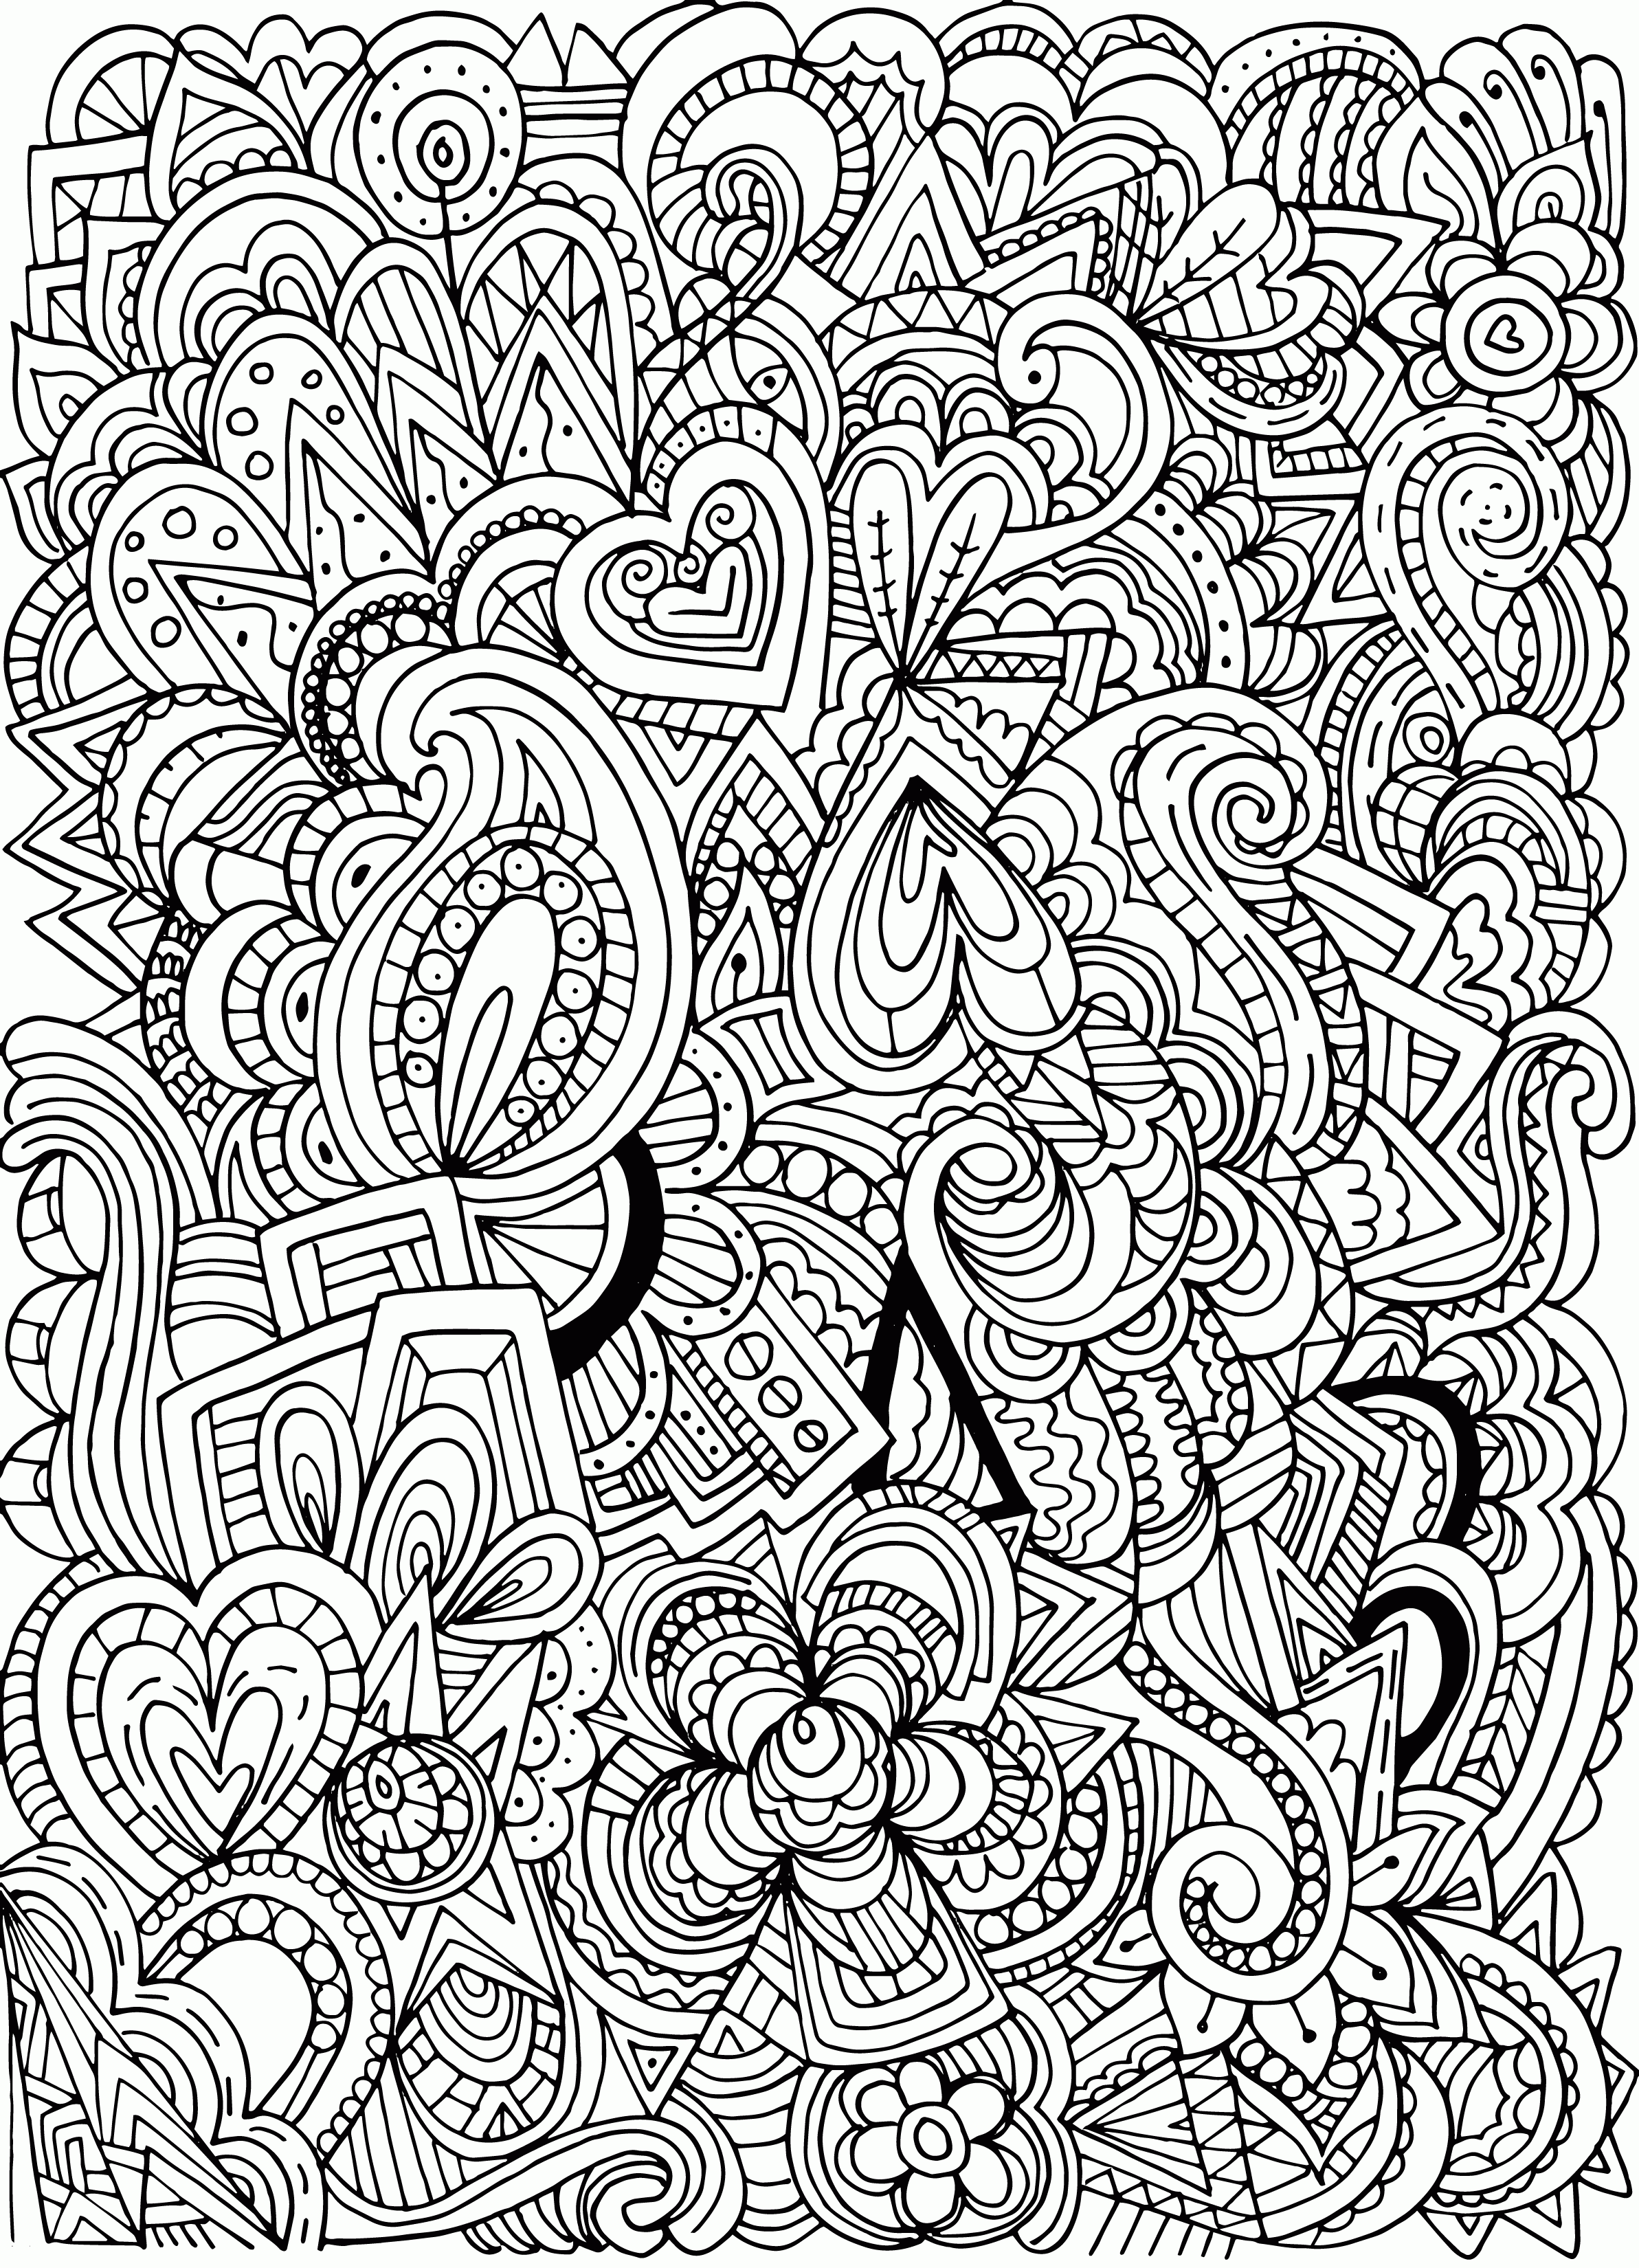 pattern coloring pages for adults don39t eat the paste rainbow coloring page adults pages for coloring pattern 